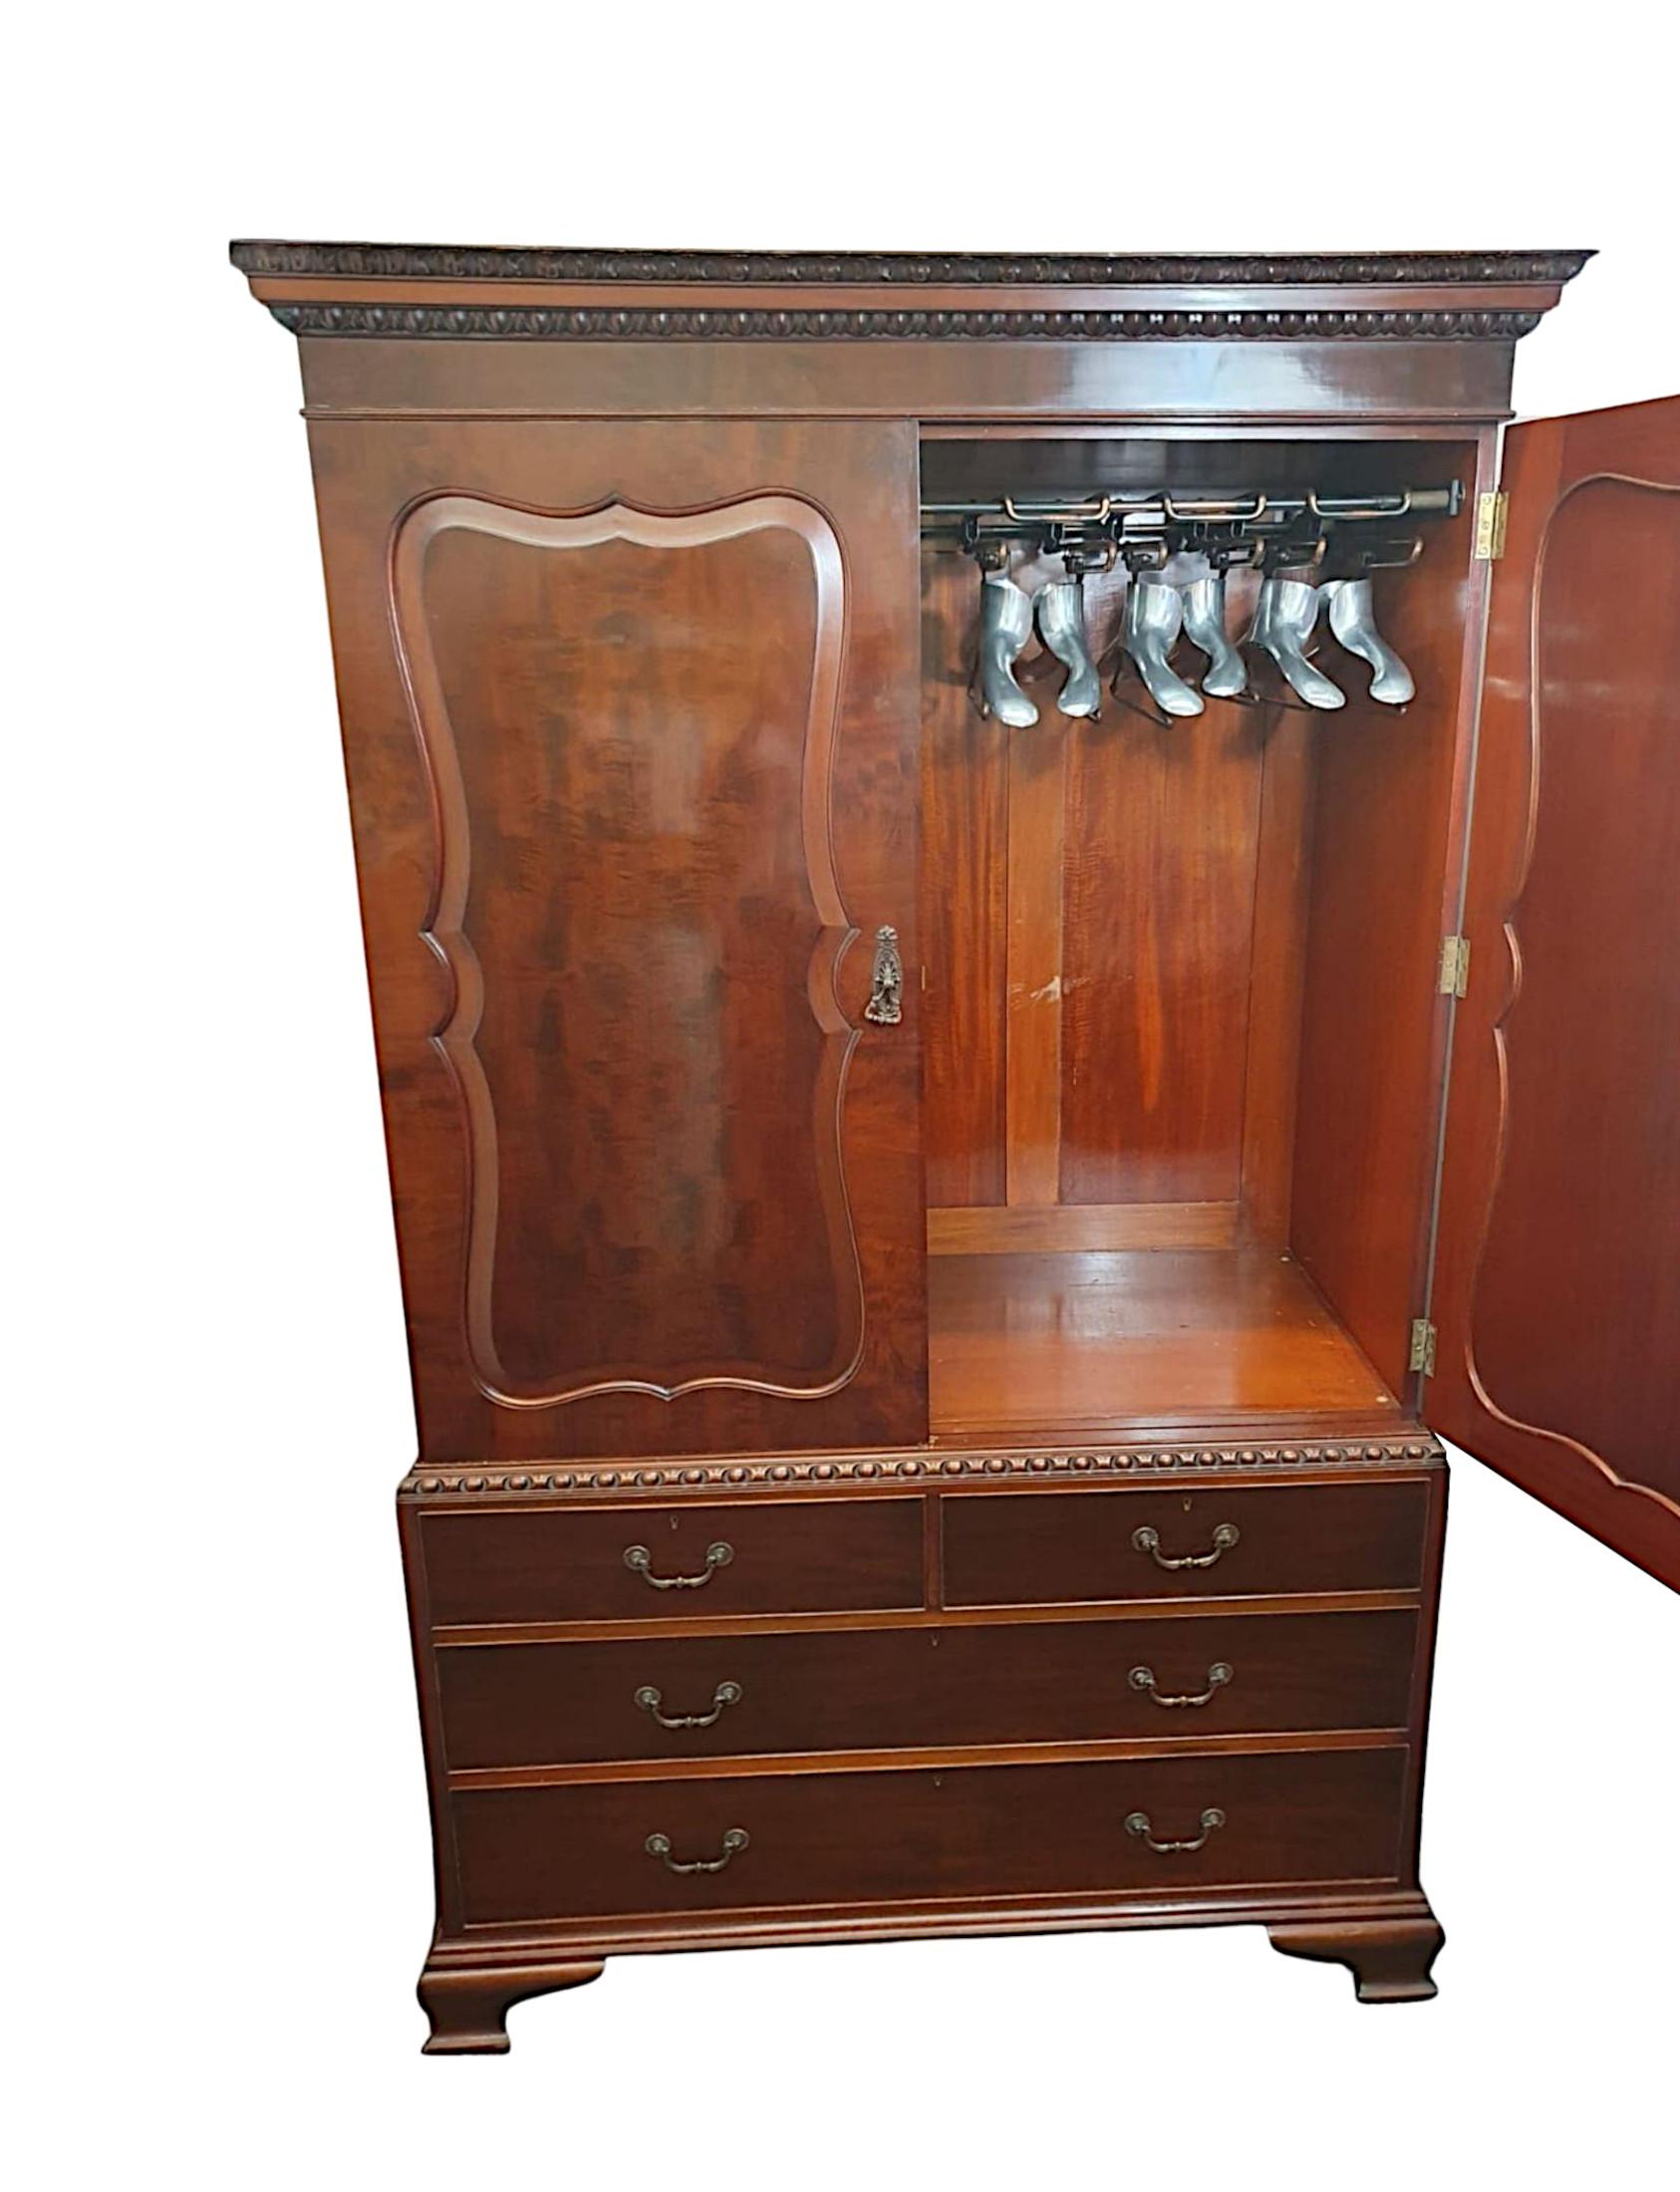 A very rare Edwardian gentleman's plum pudding and flame mahogany wardrobe with chest base. The stepped cavetto pediment with intricately hand carved egg and dart motif raised over two doors with beautifully shaped panels of stylised rectangular